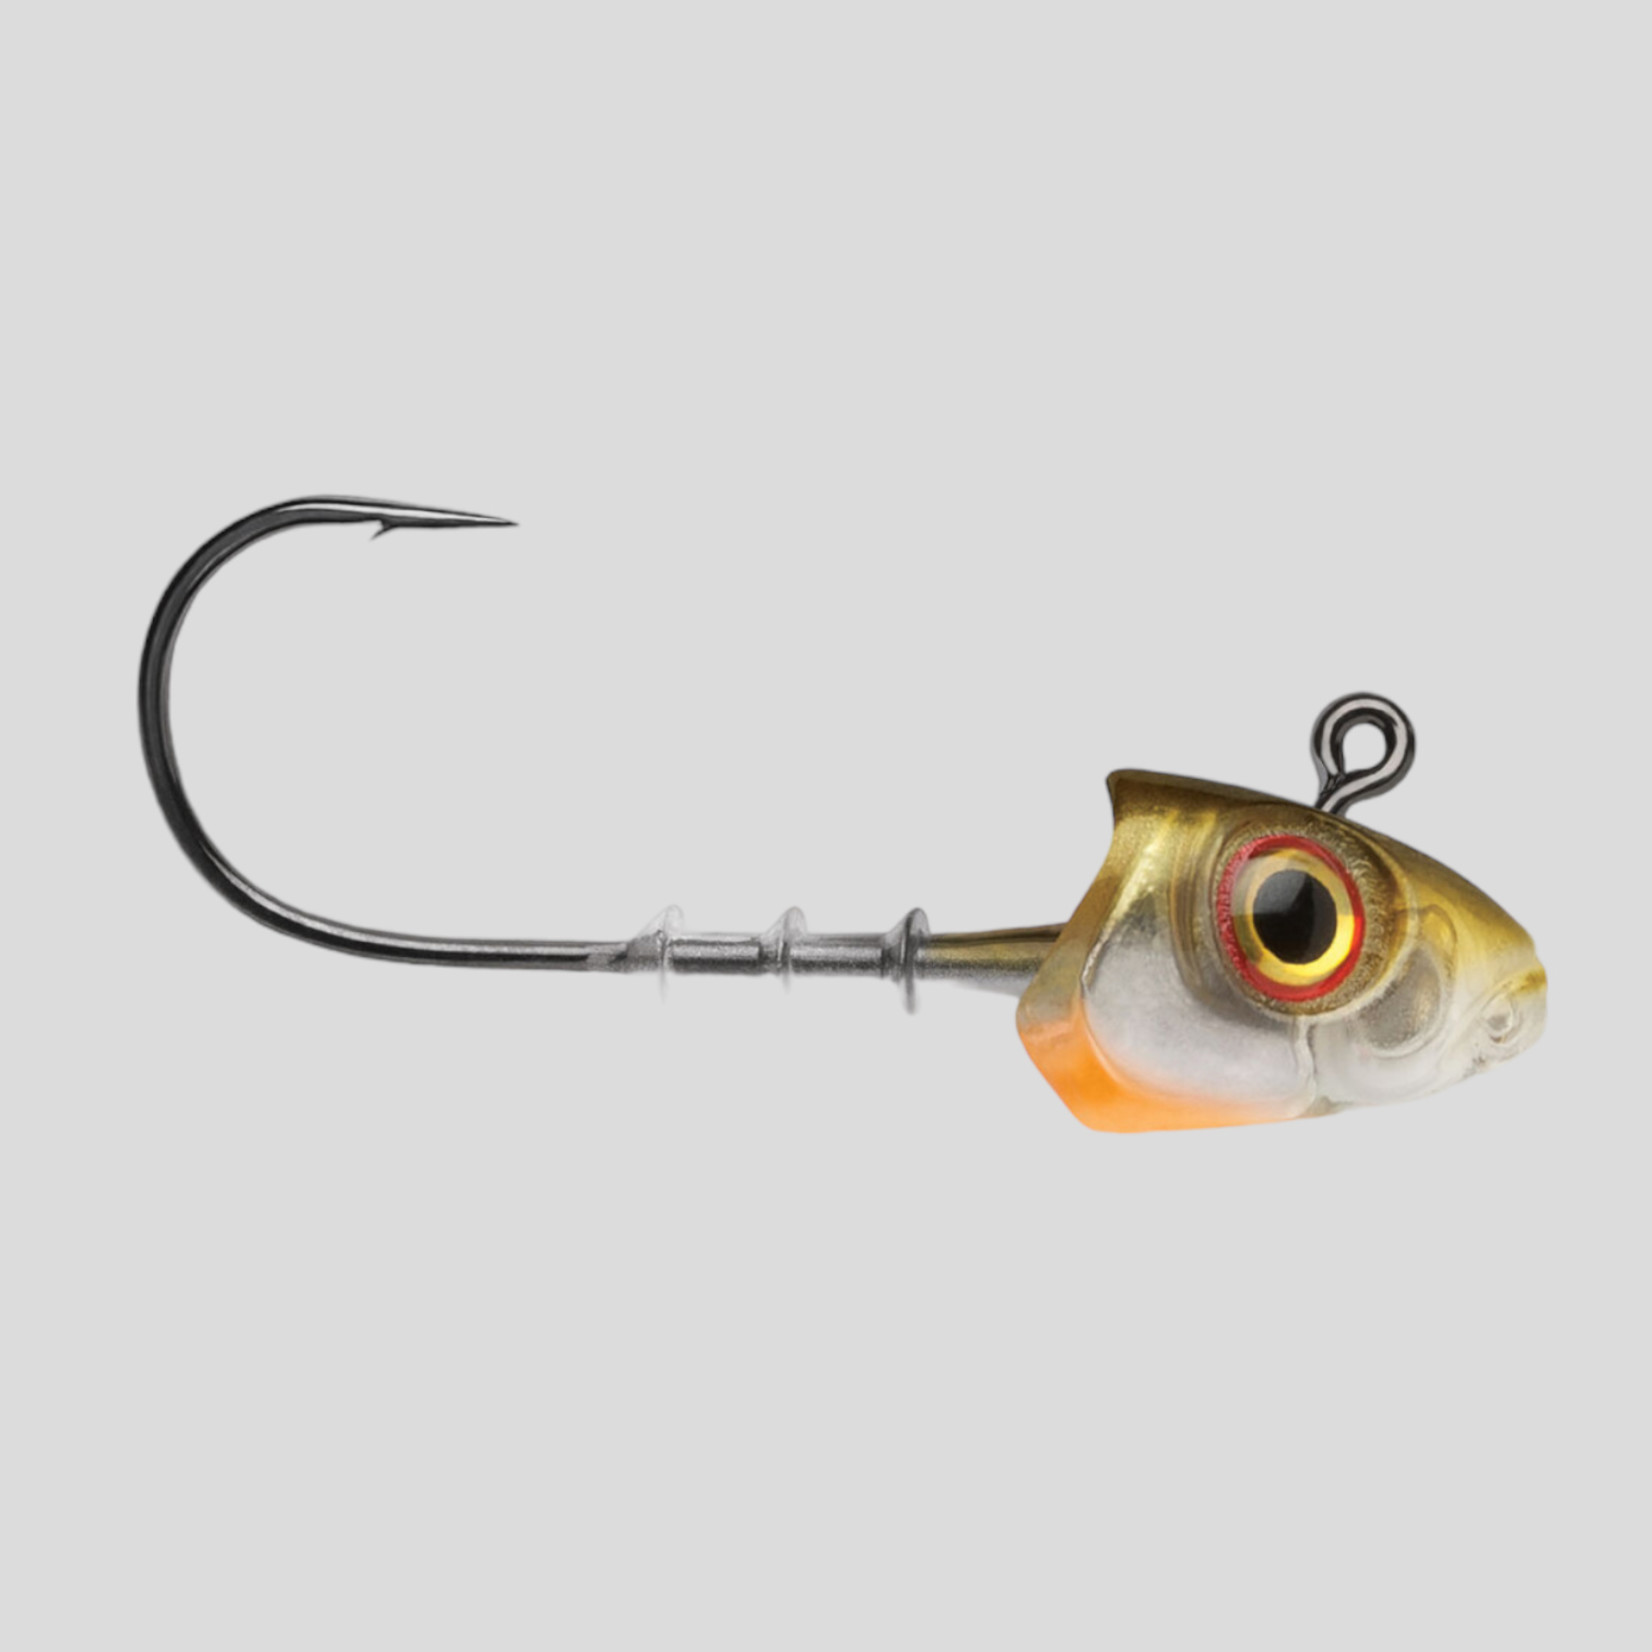 Storm 360GT Searchbait Jig - Tyalure Tackle